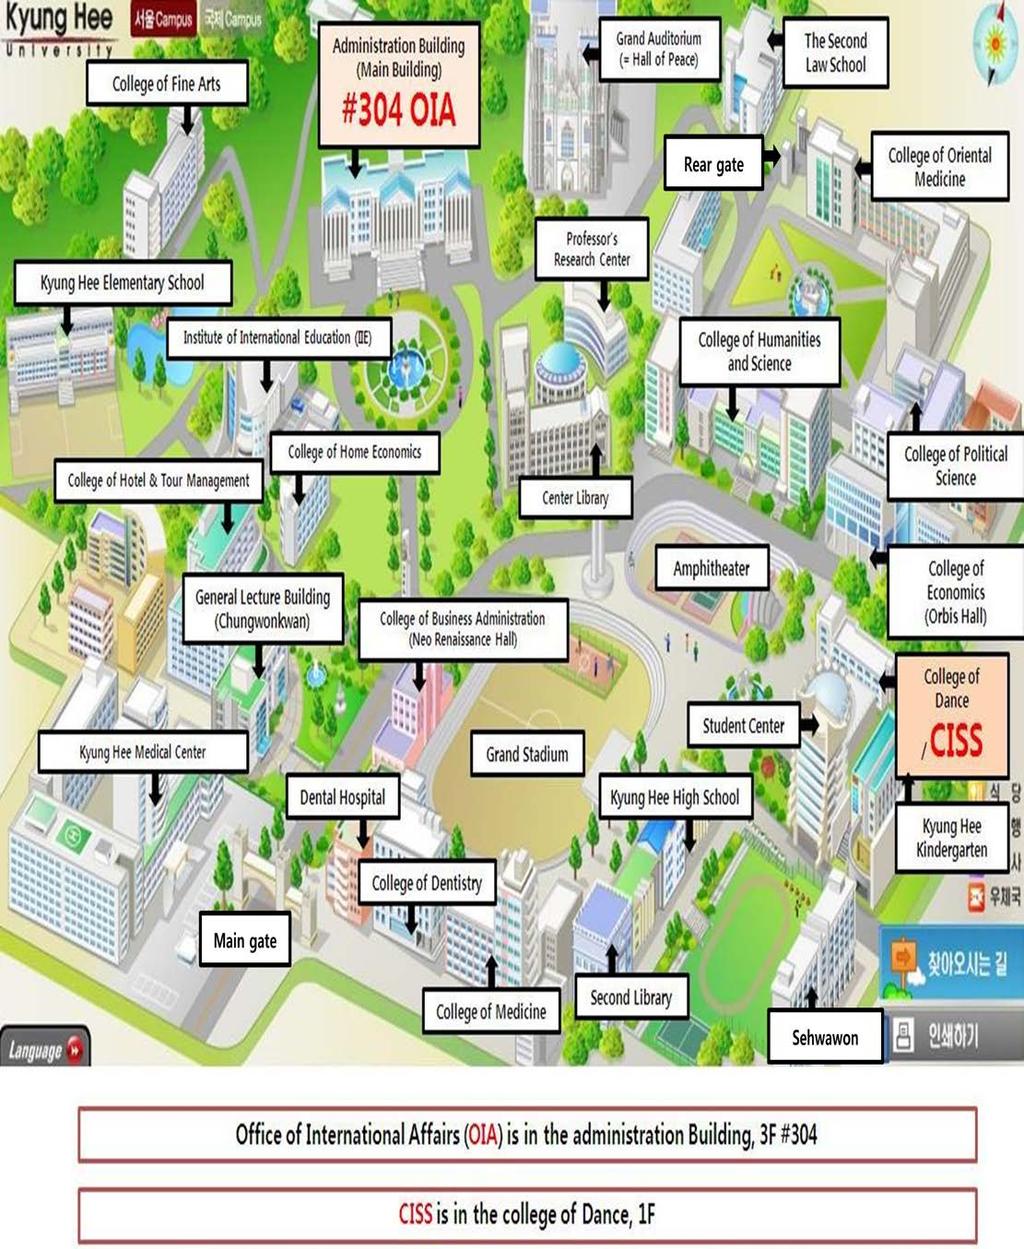 4. Campus Map including OIA and CISS You can see